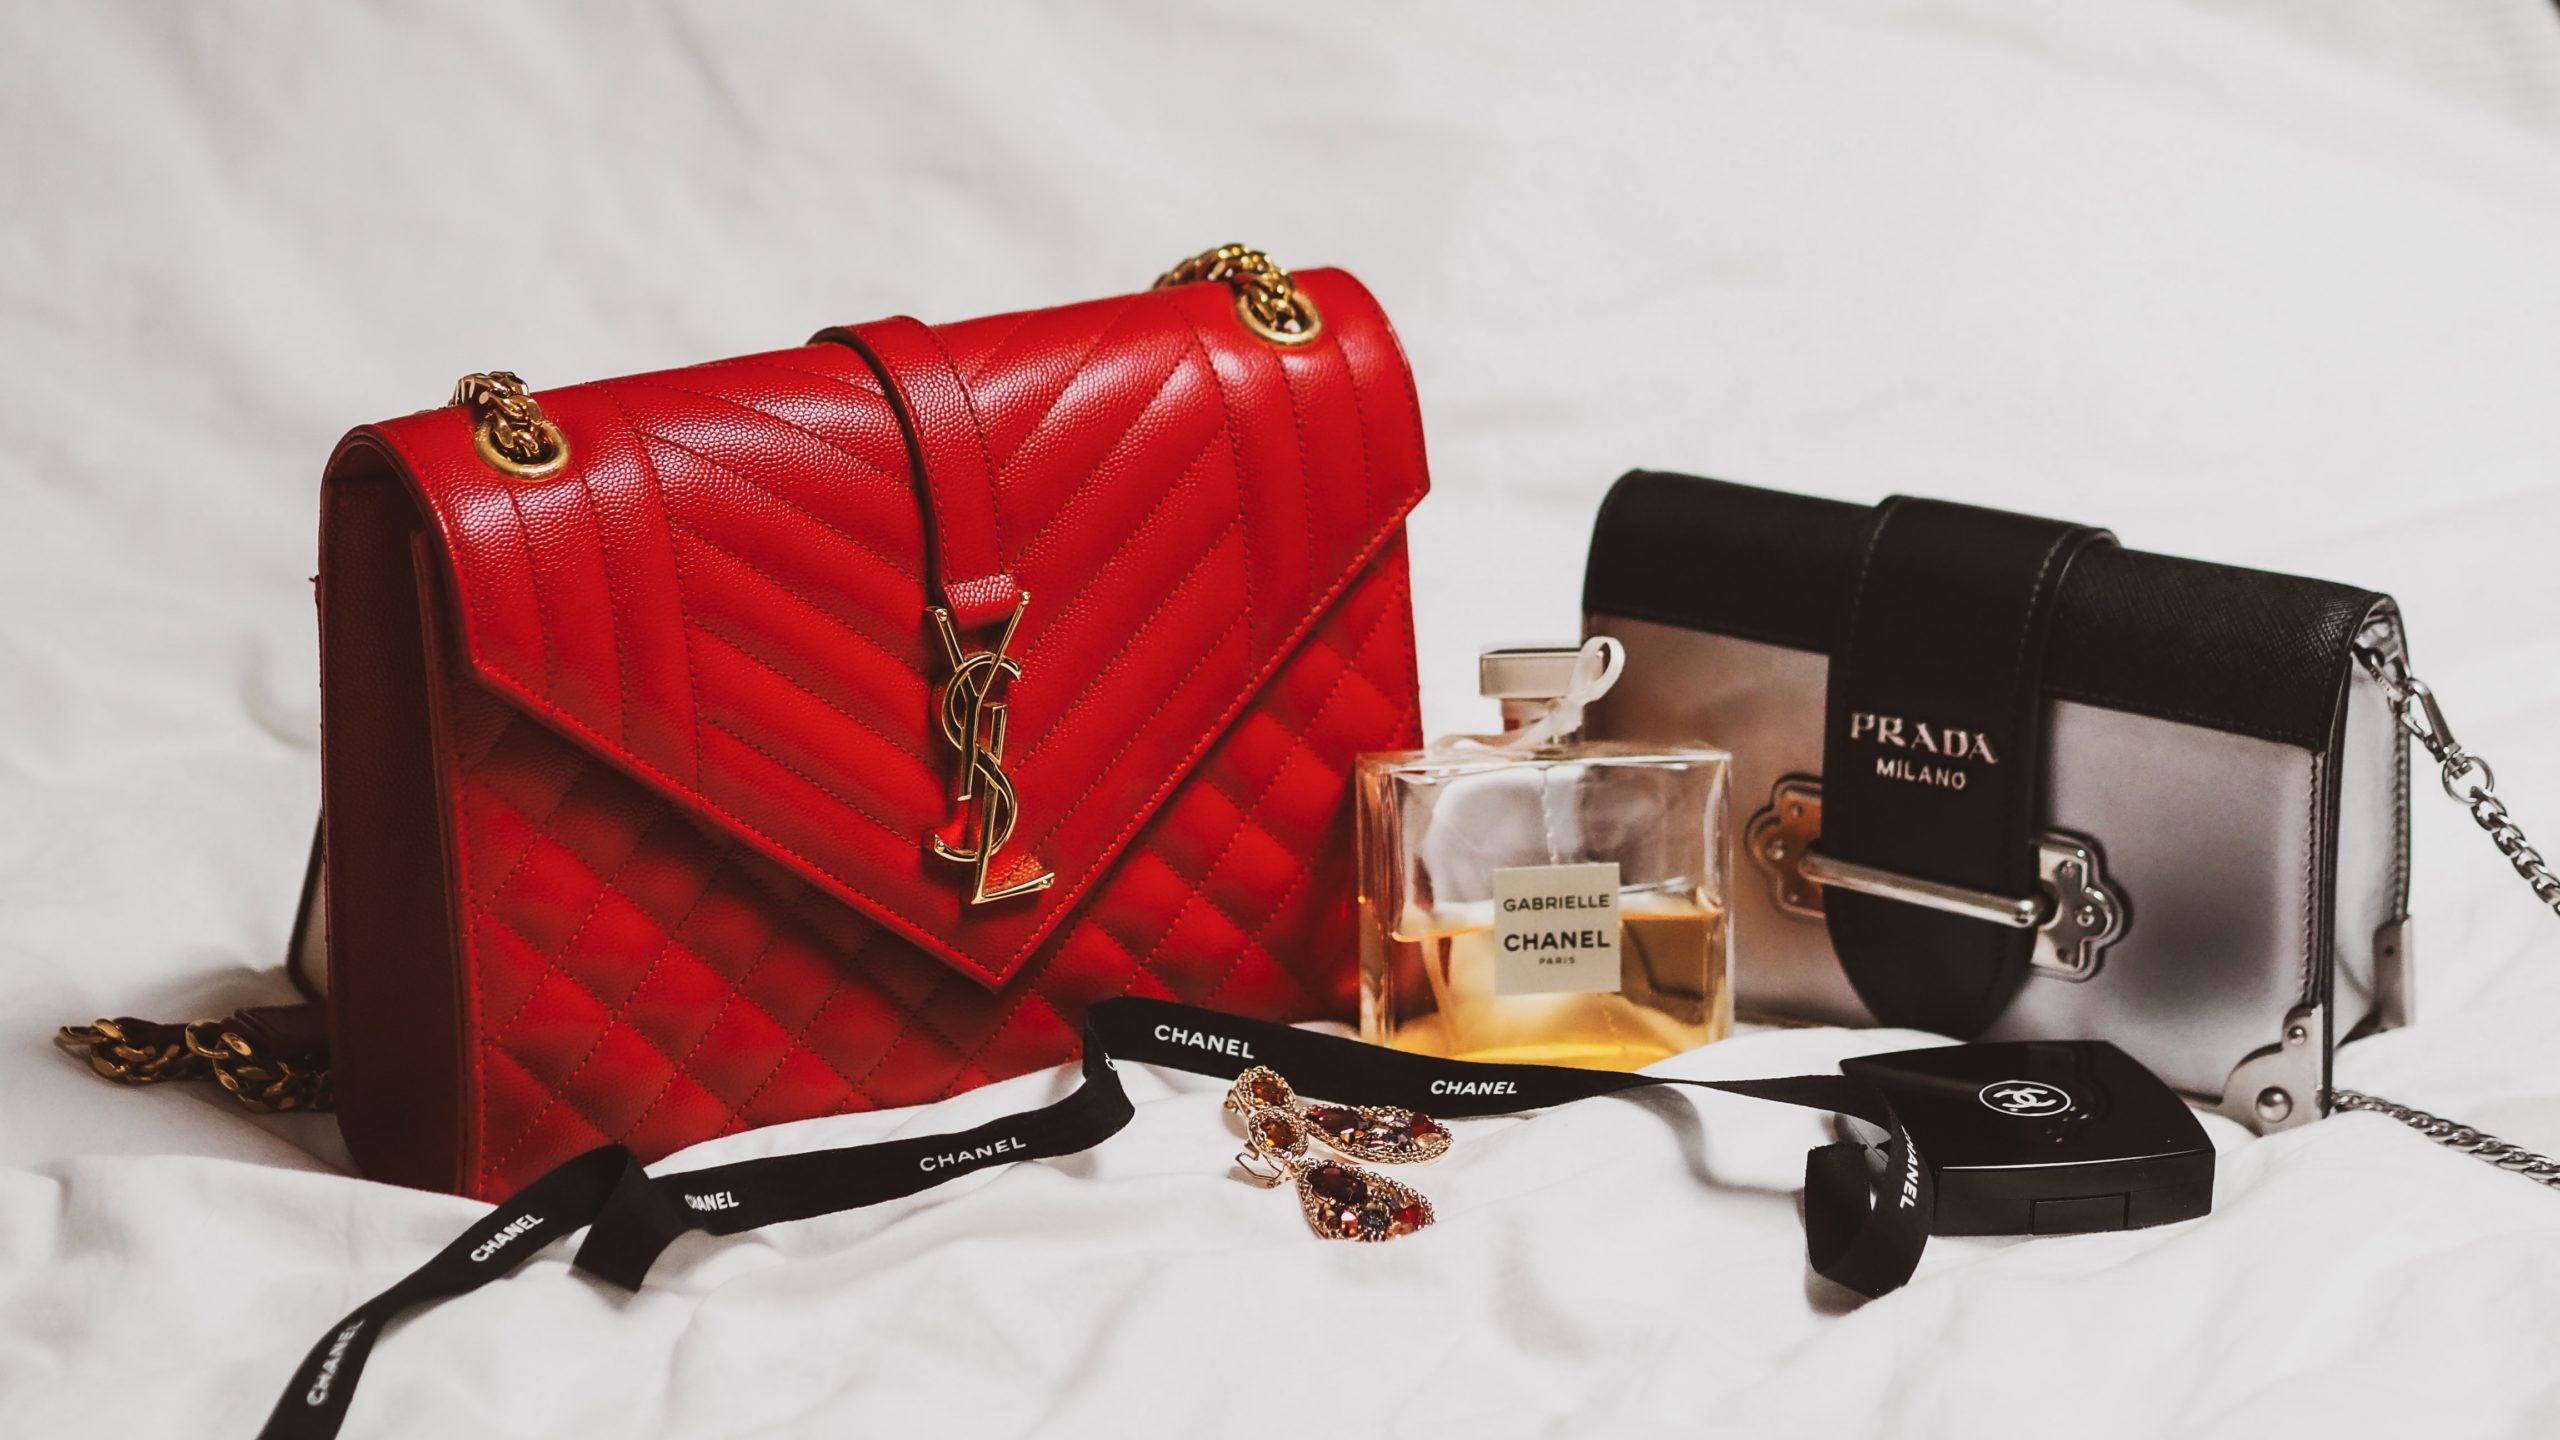 The secret reasons why rich women resell their luxury goods